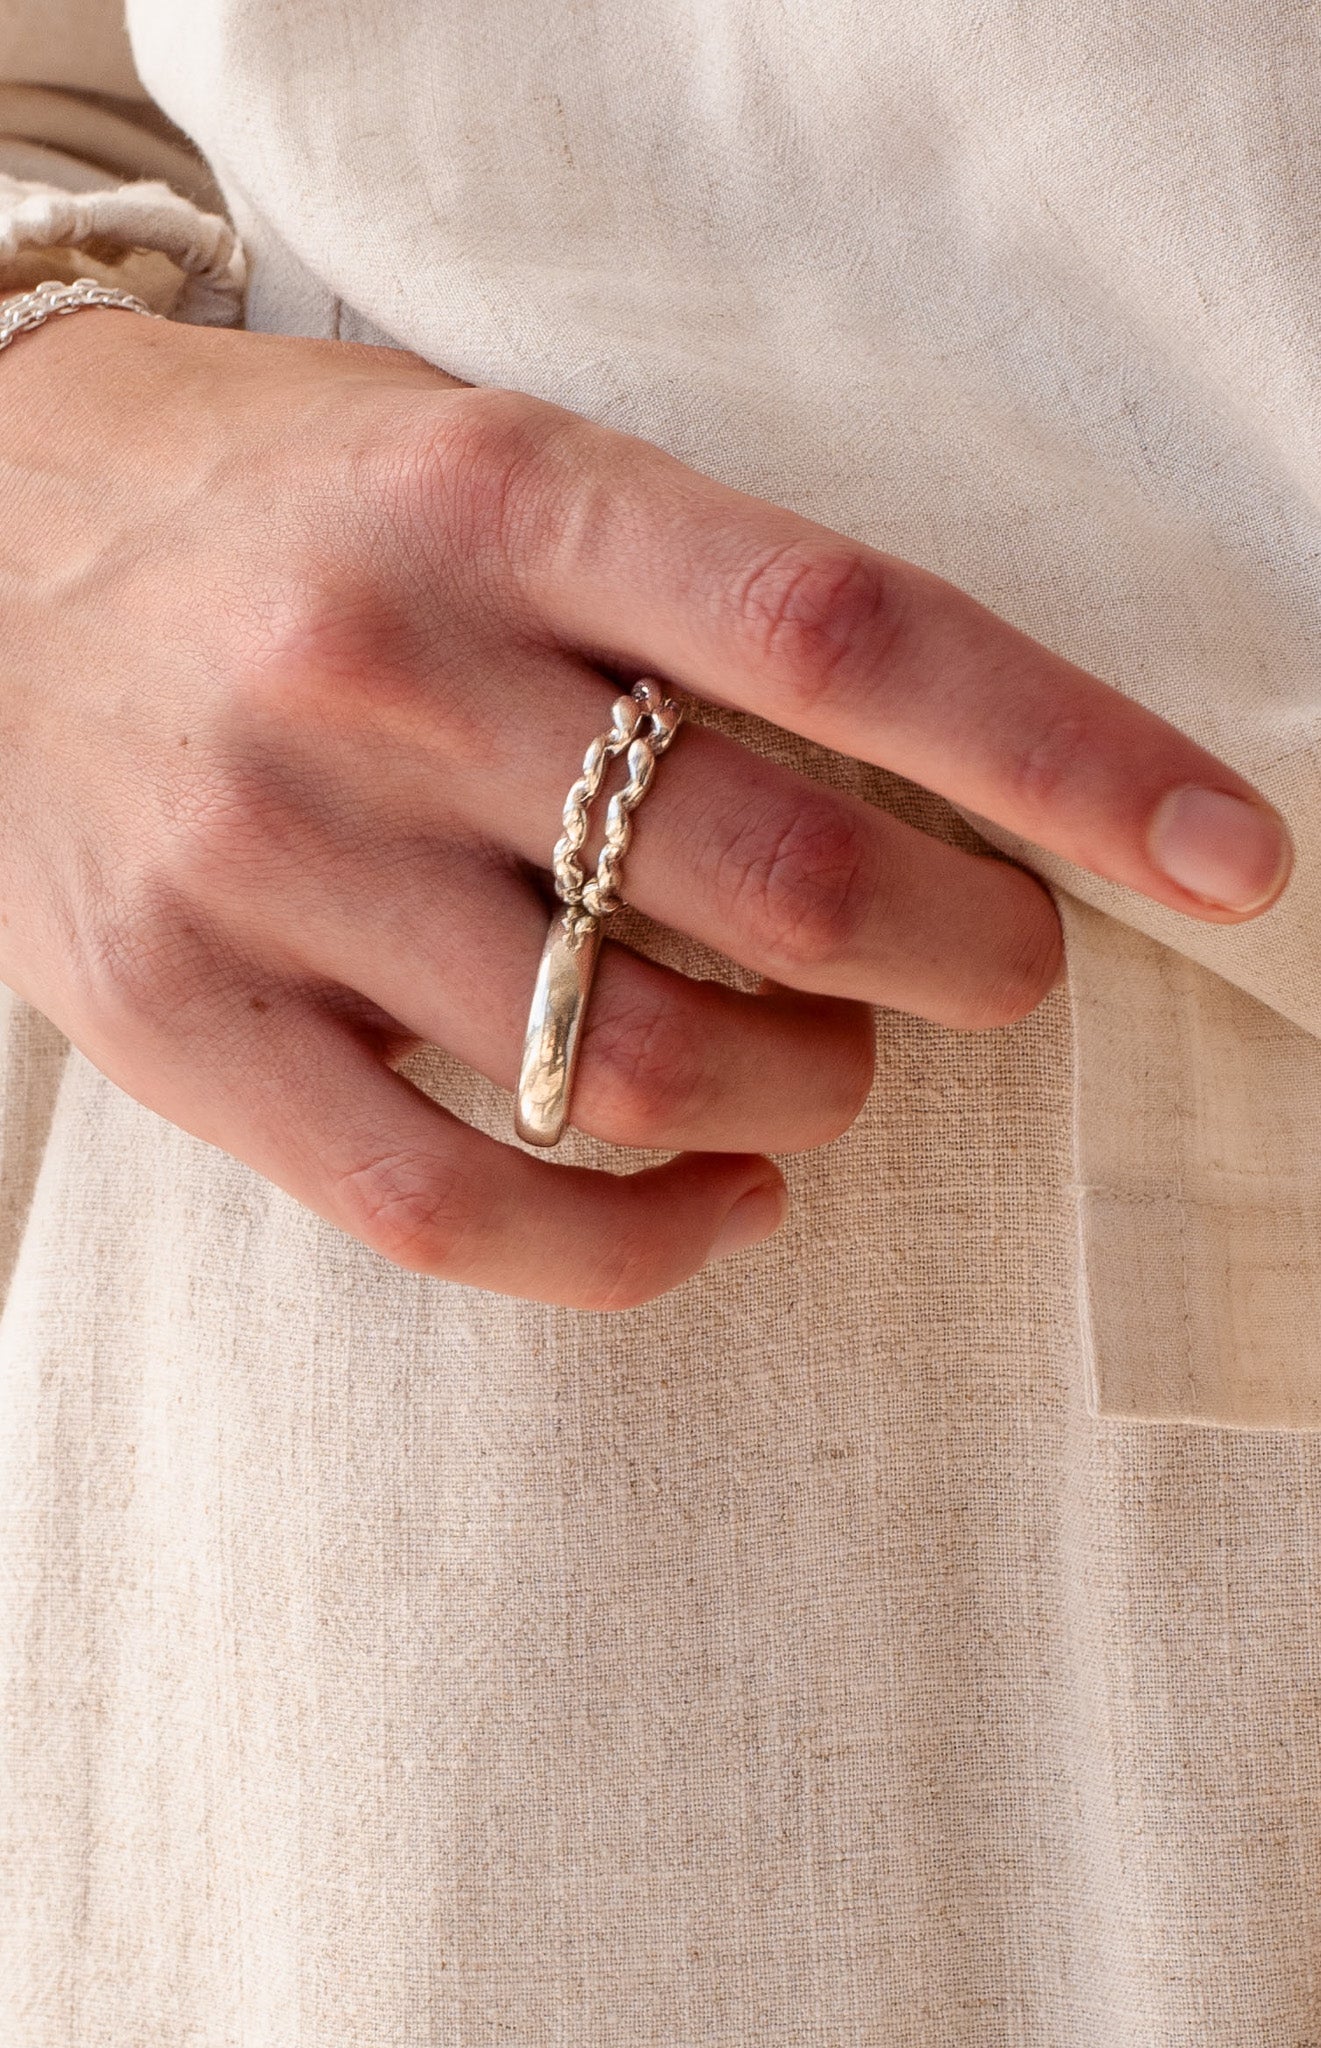 silver rings stacked one hand to form a cohesive look. Playful stacking of rings. Minimalist silver rings.